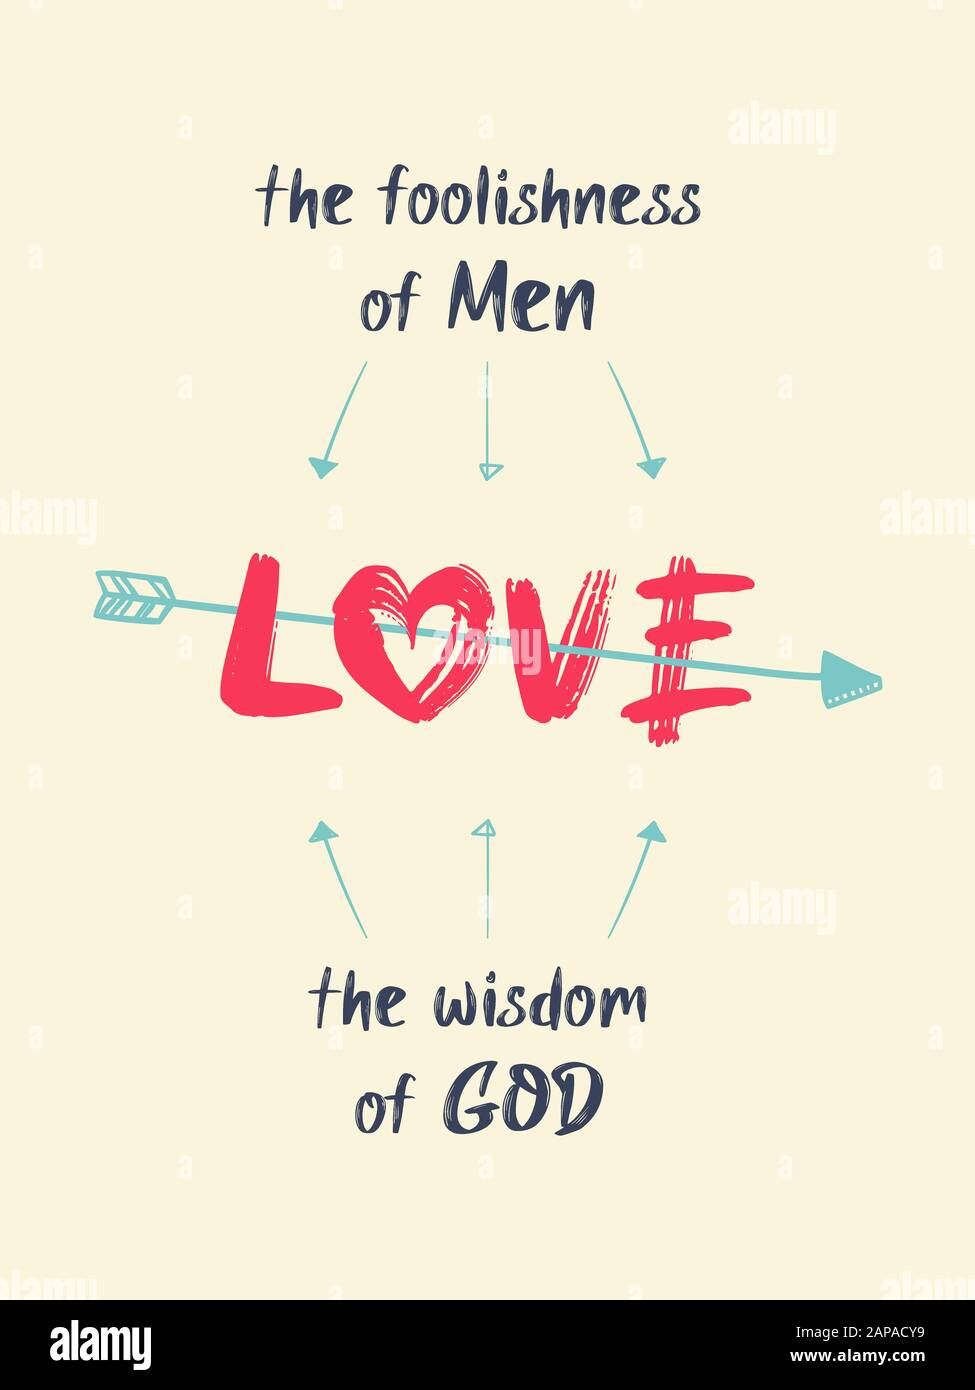 Love is the foolishness of men and the wisdom of God, quote by Victor Hugo, Les Misérables. Minimalist lettering composition, conceptual text illustra Stock Photo